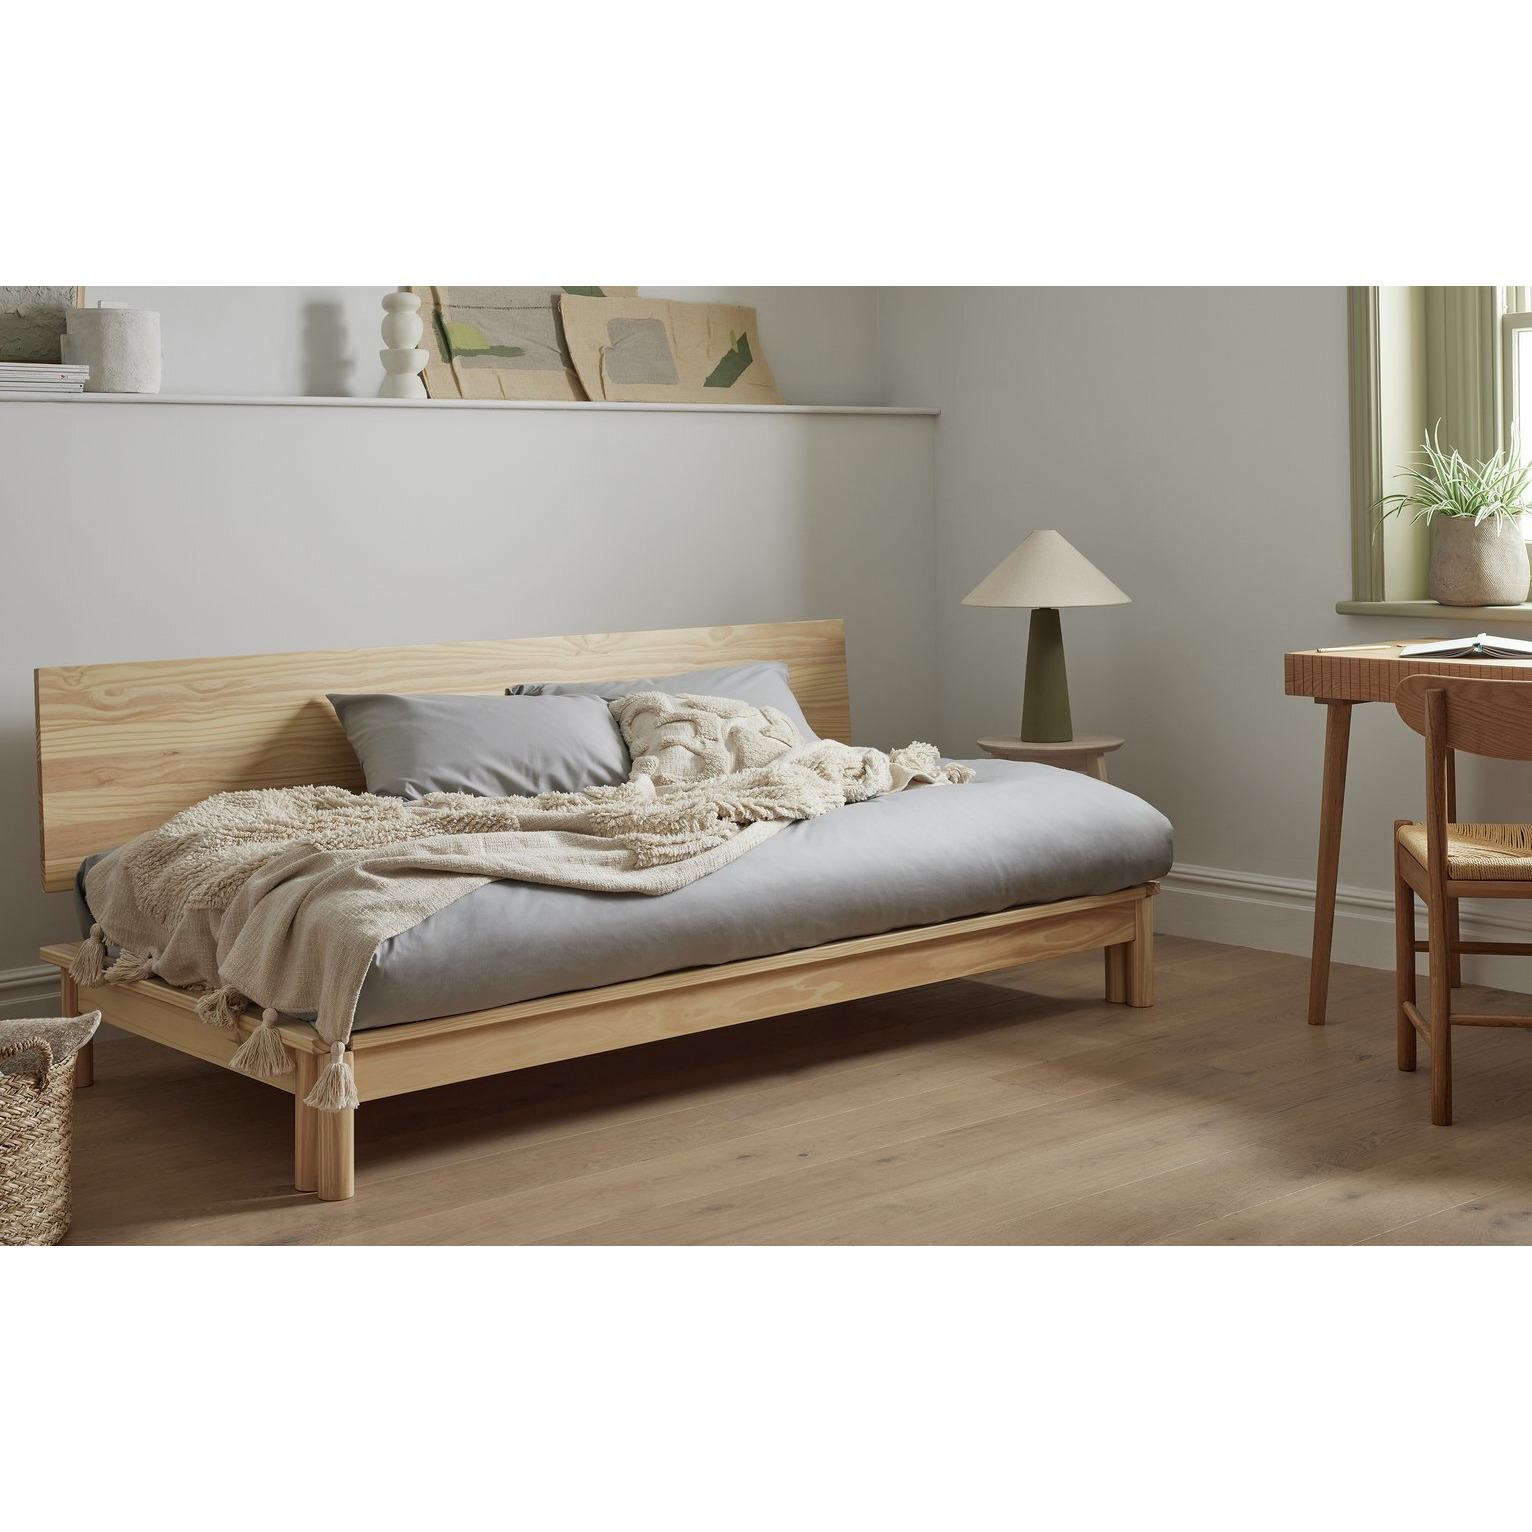 Habitat Akio Guest Bed with 2 Mattresses - Natural - image 1